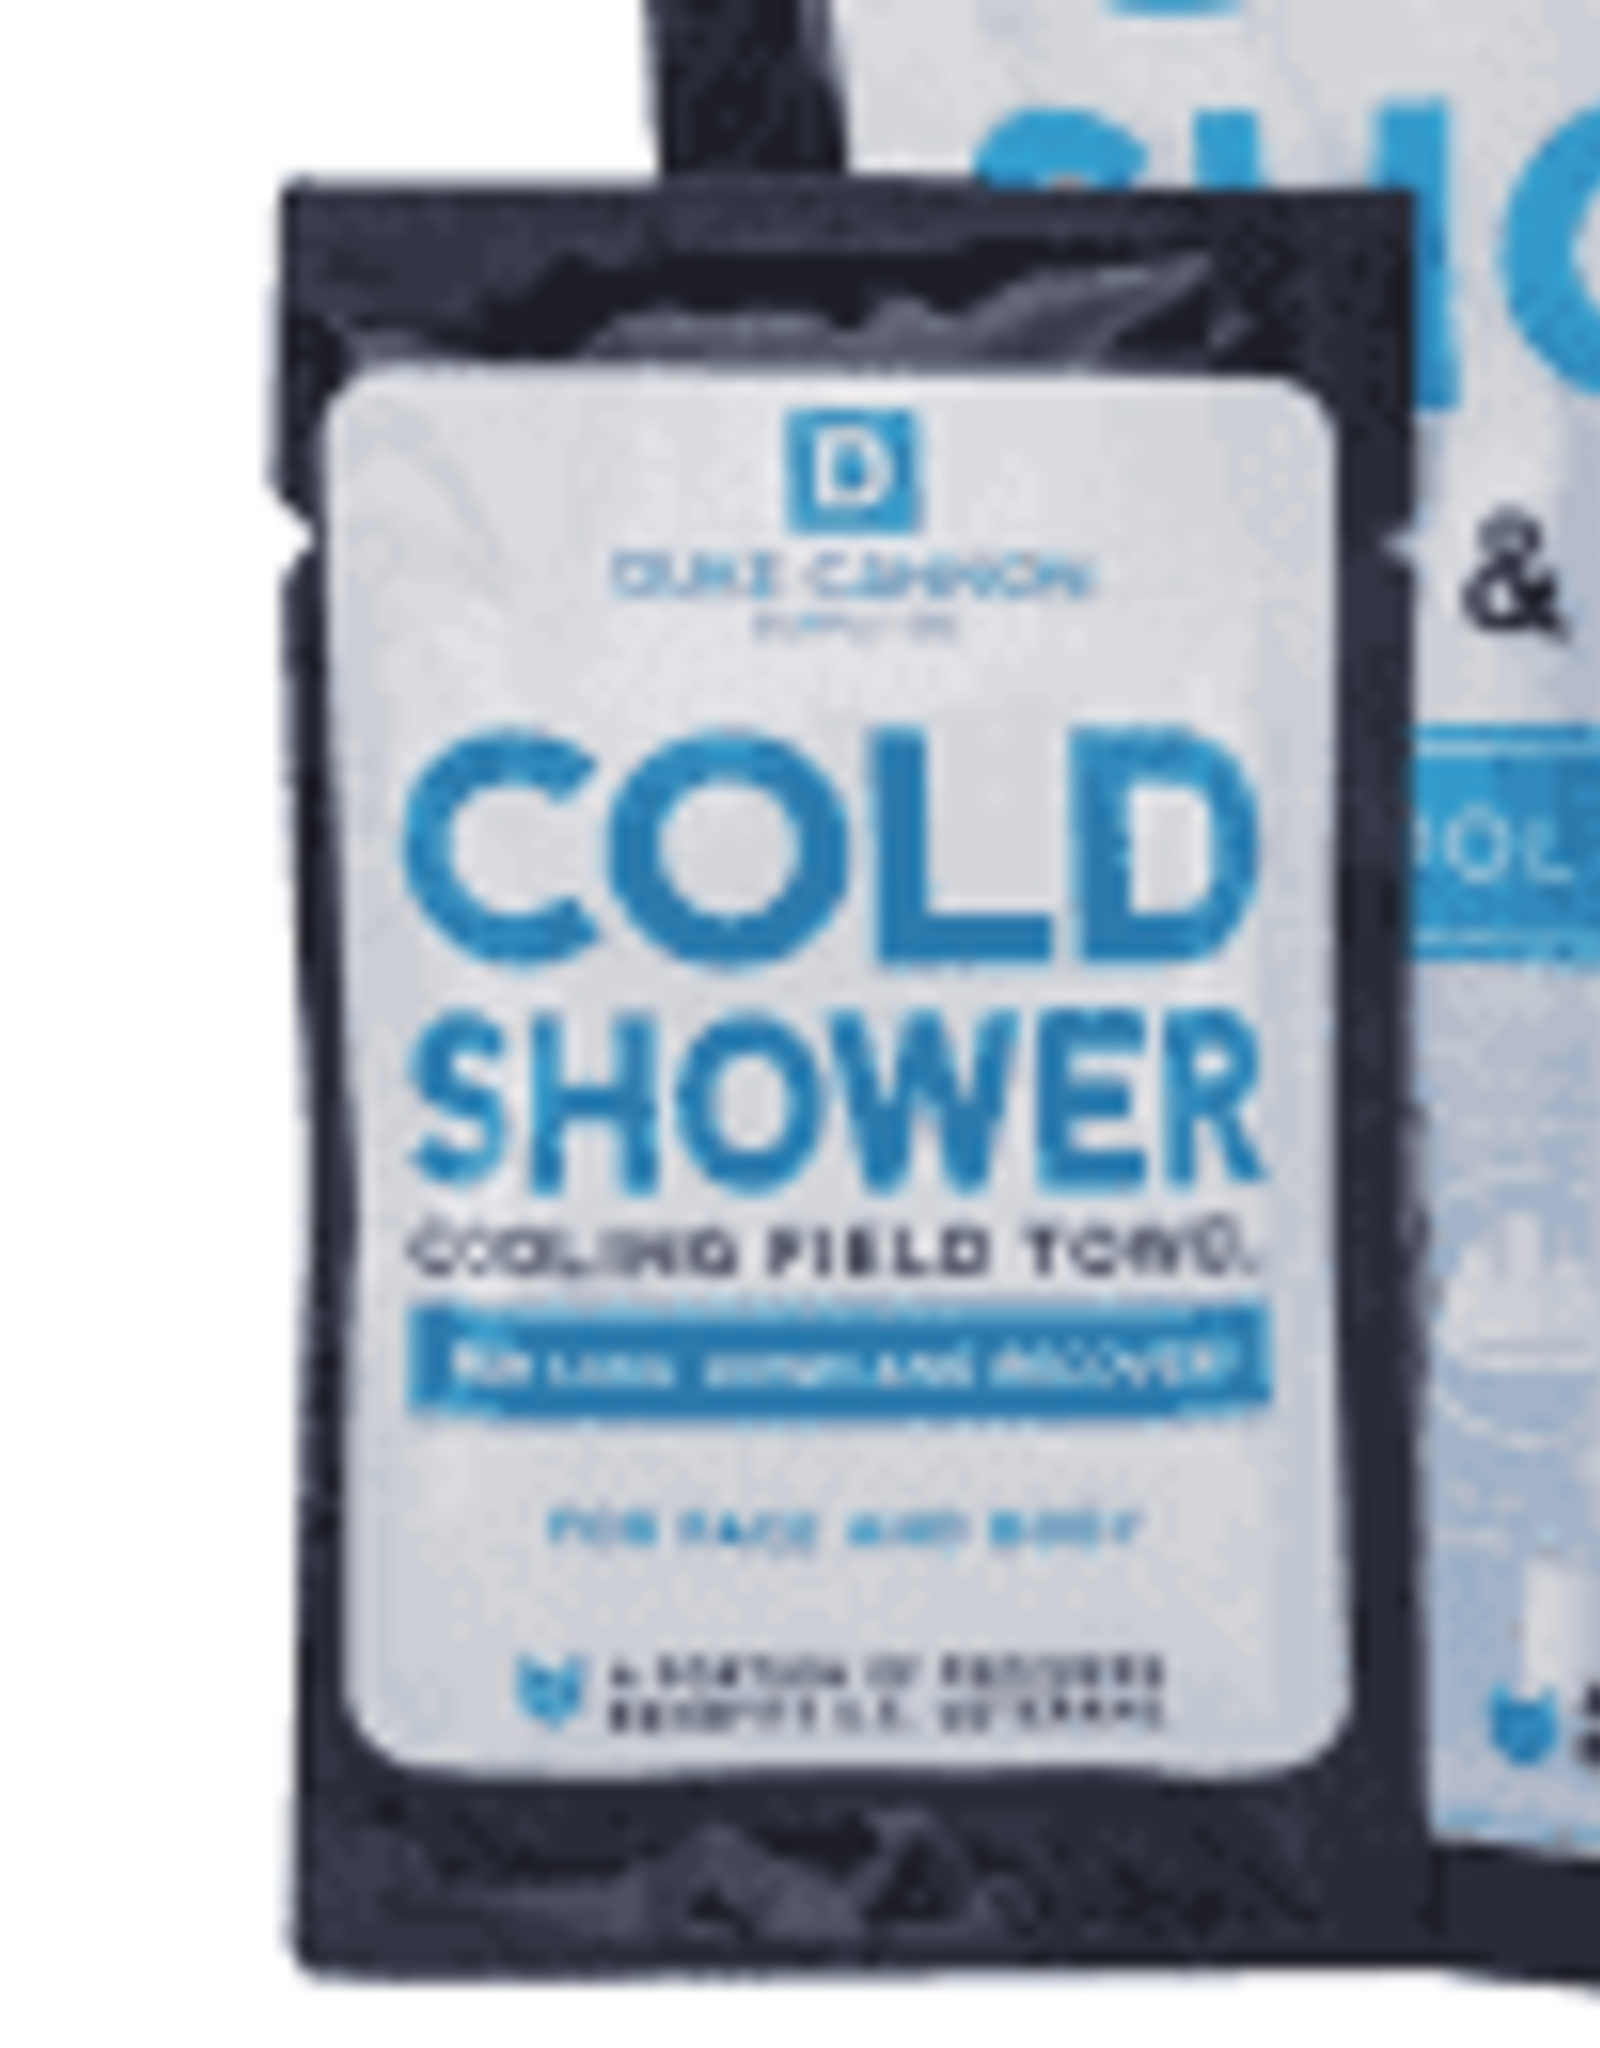 Mens Duke Cannon - Cold Shower Cooling Field Towel